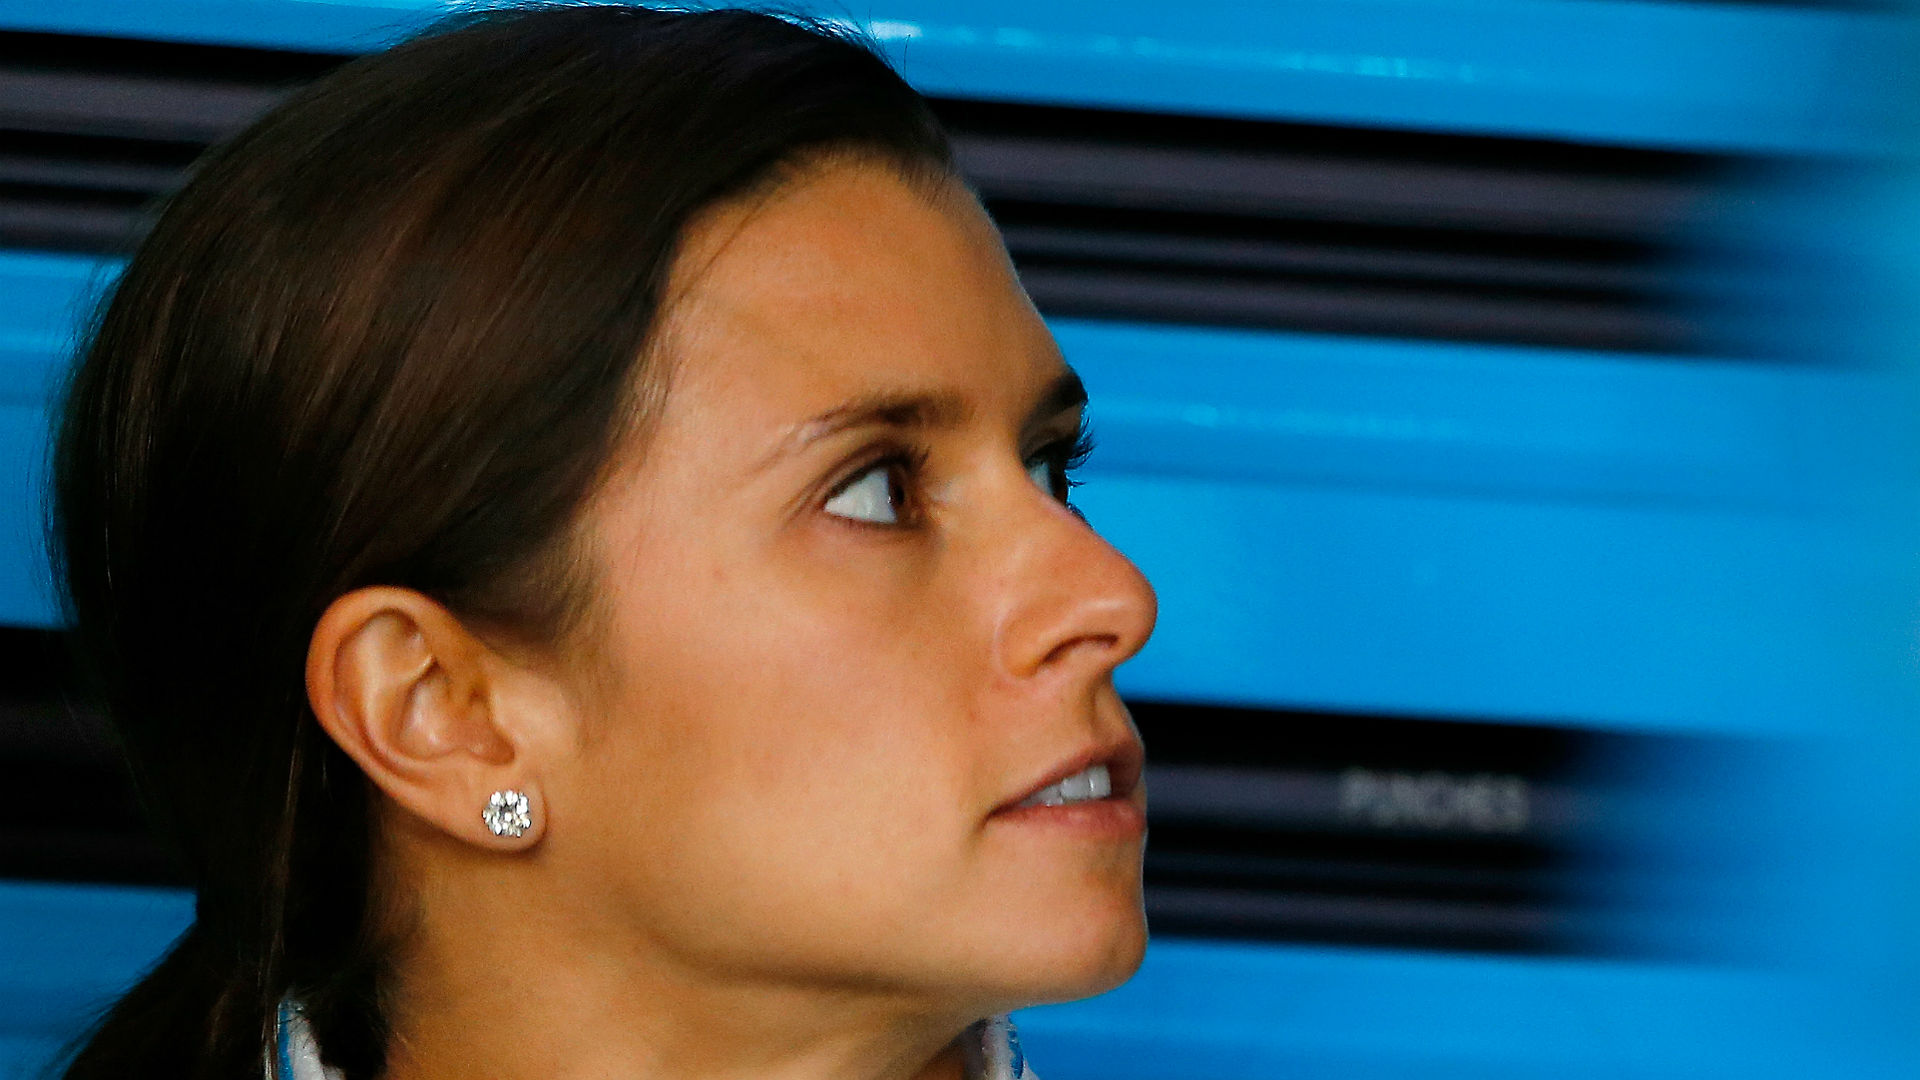 Watch: Danica Patrick crashes out of penultimate NASCAR race of career